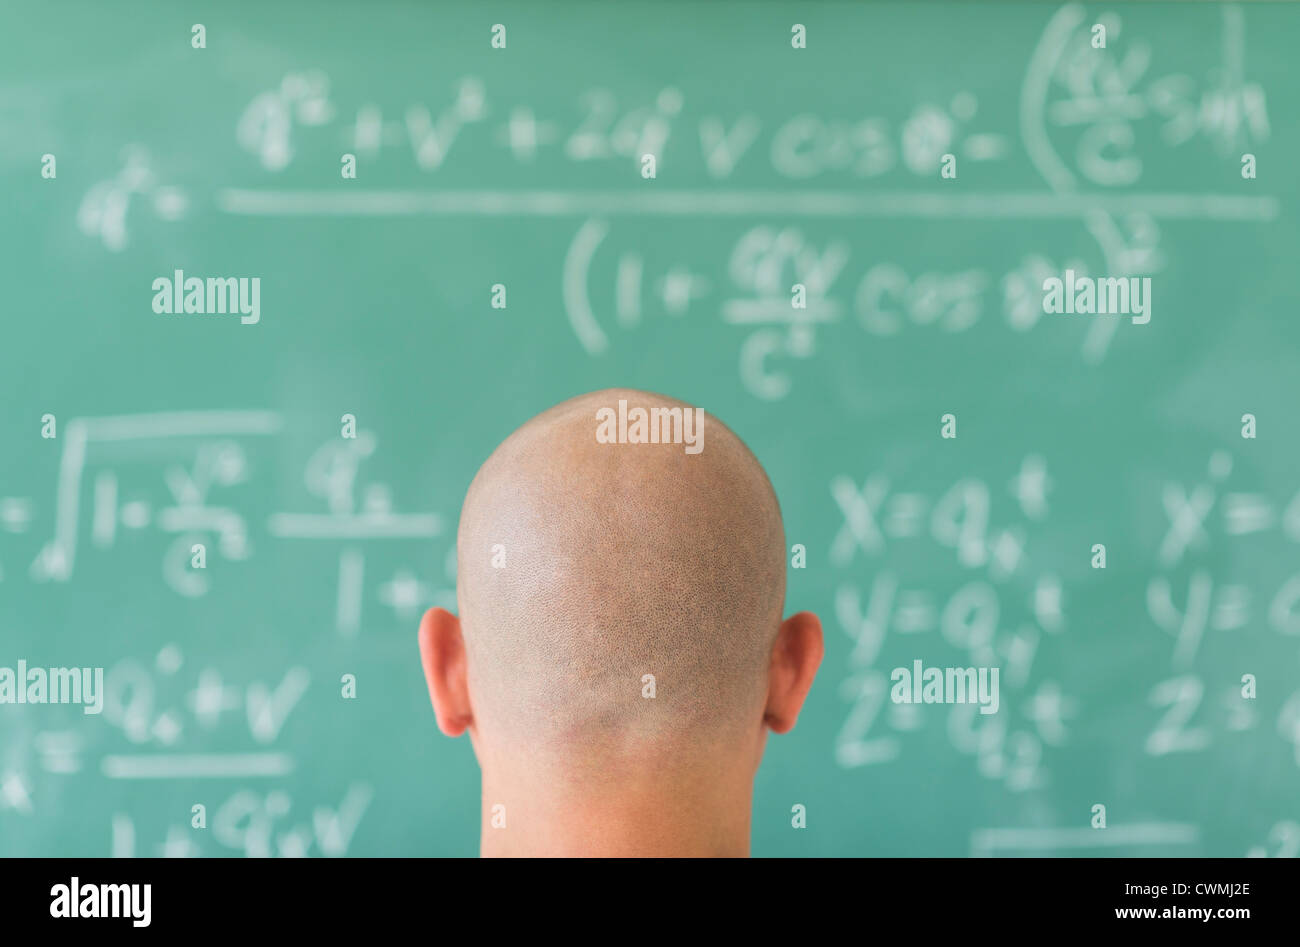 Man in front of blackboard with formulas Stock Photo